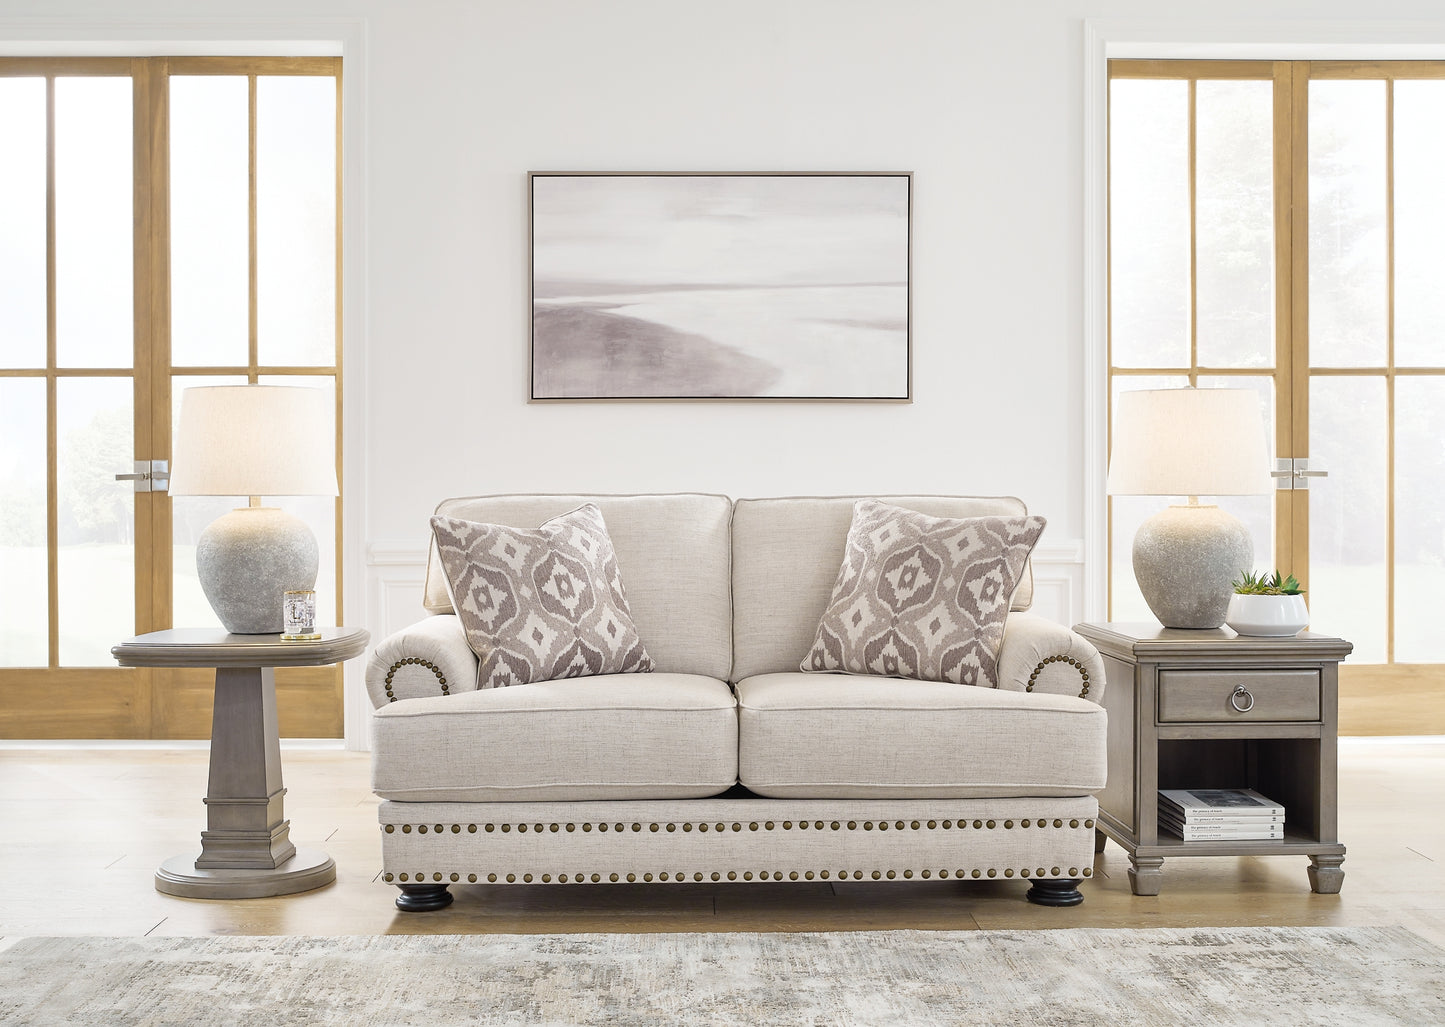 Merrimore Sofa, Loveseat, Chair and Ottoman